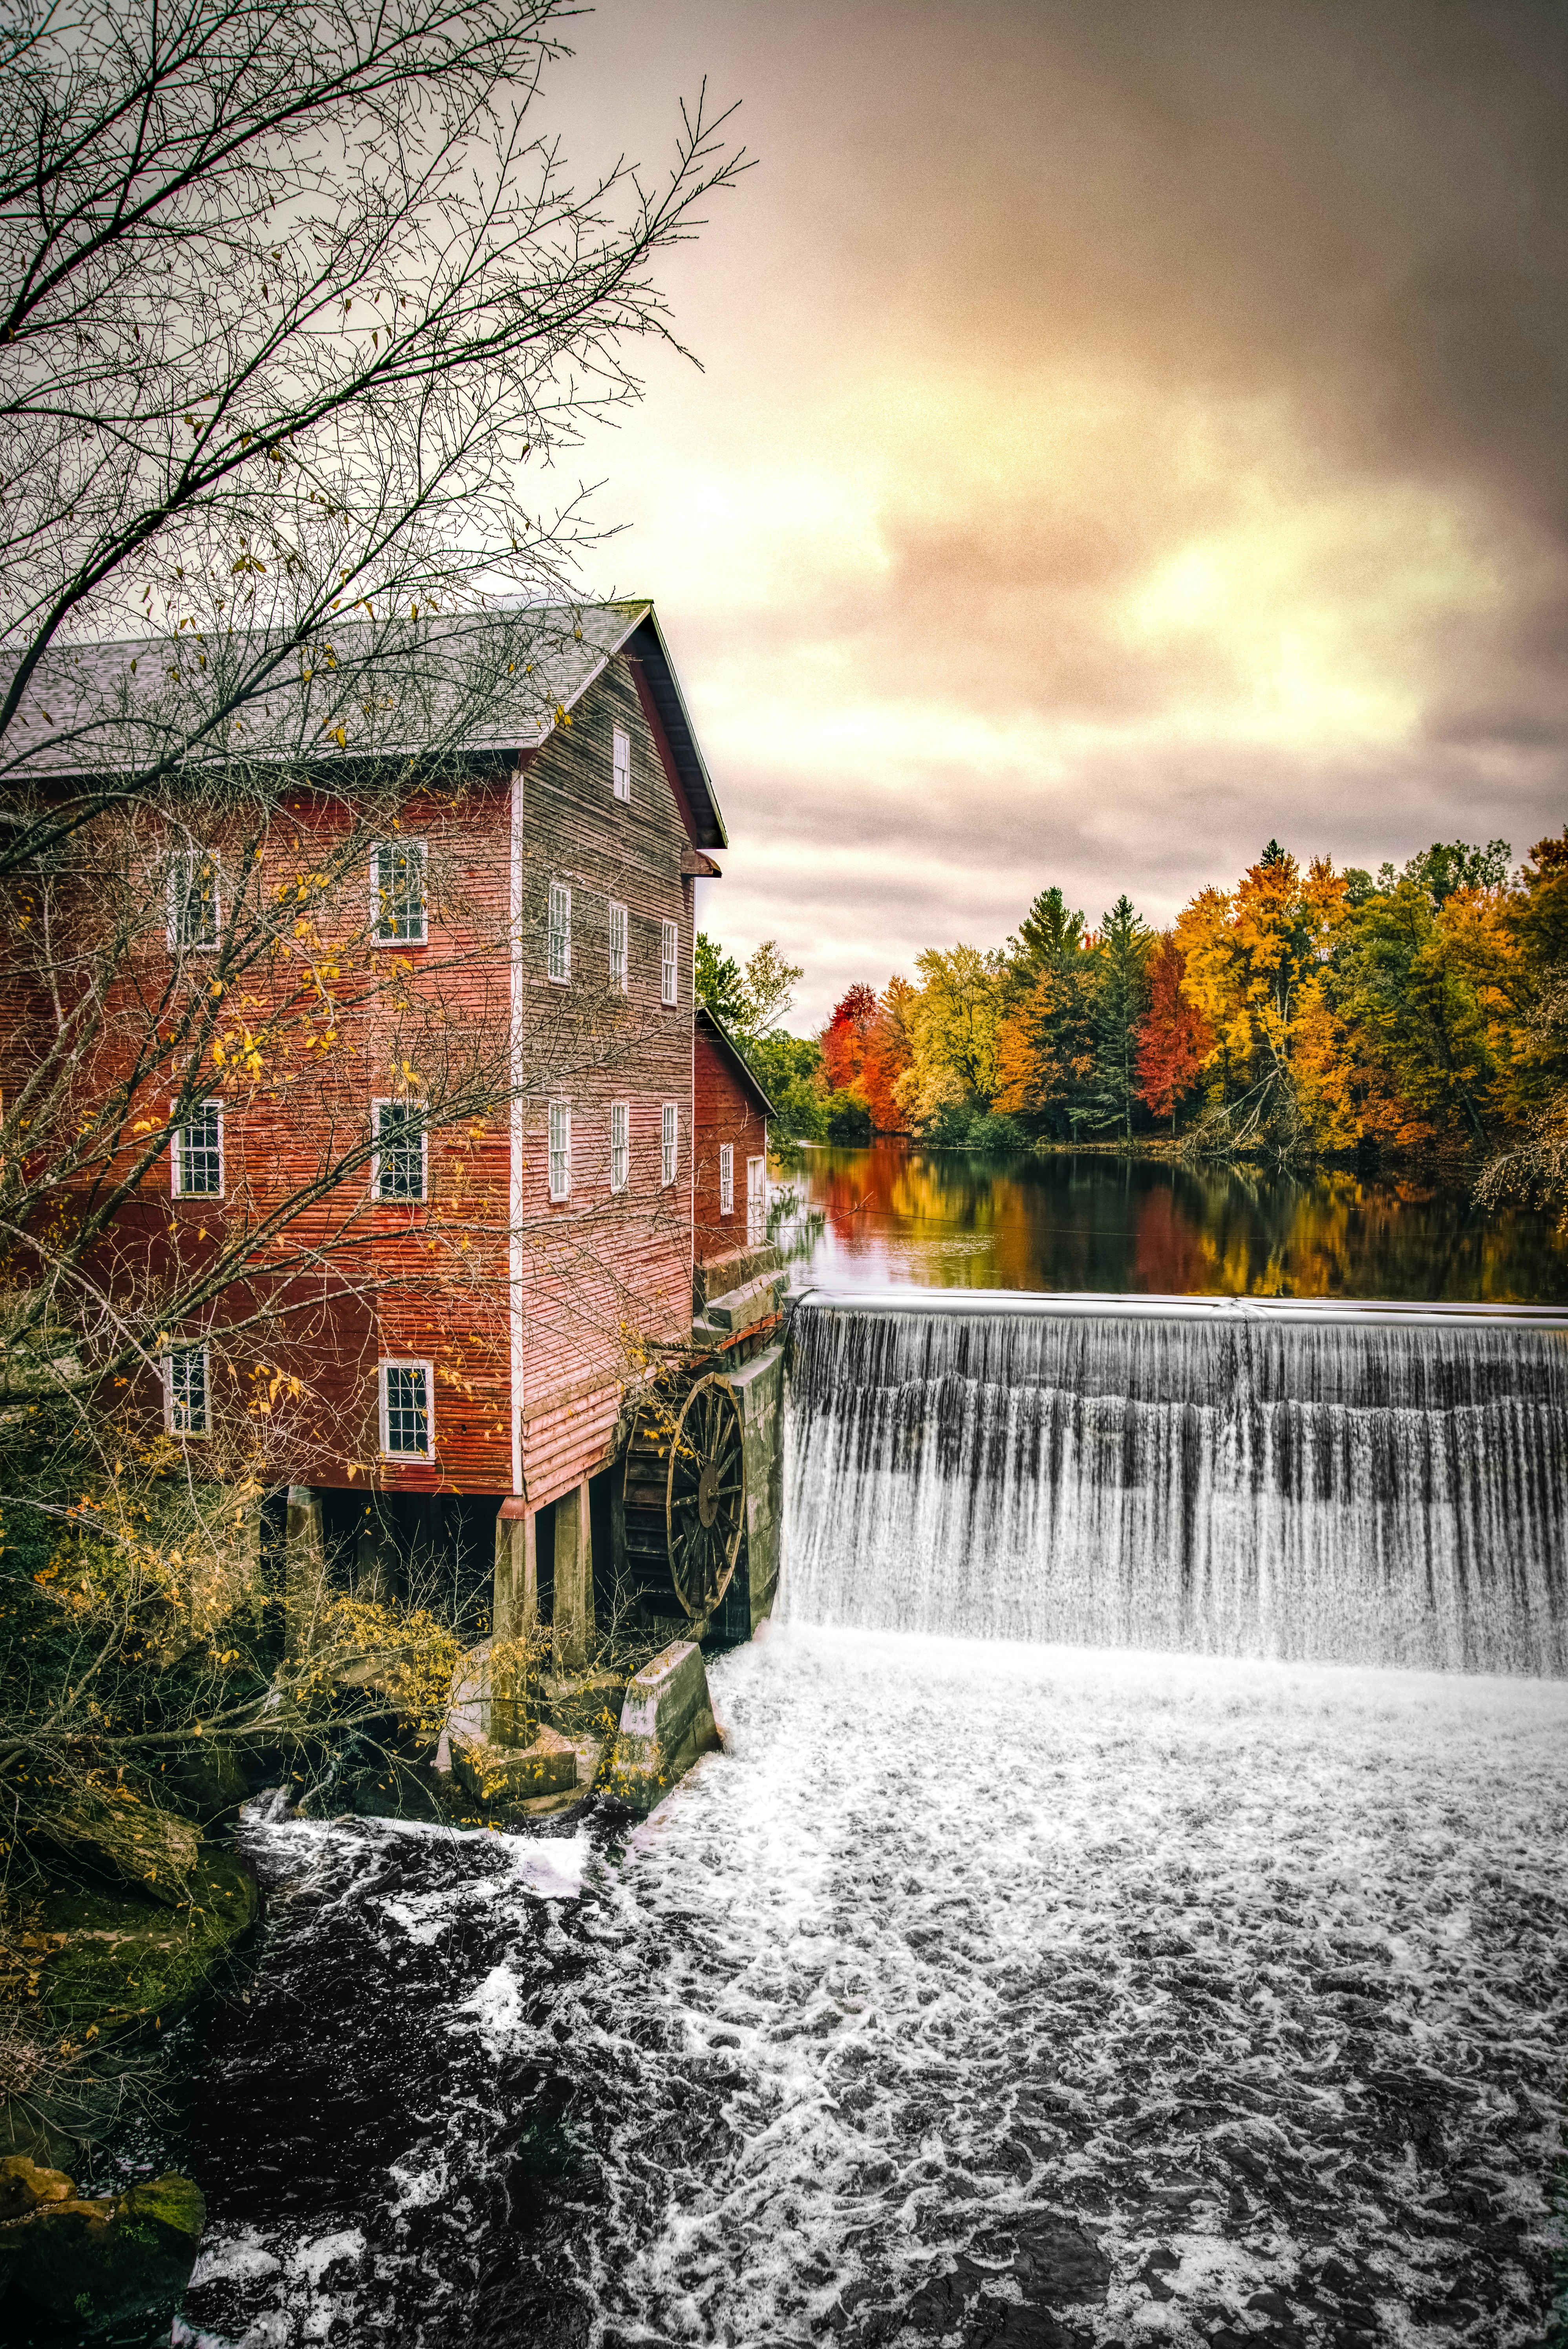 watermill near waterfall during cloudy day